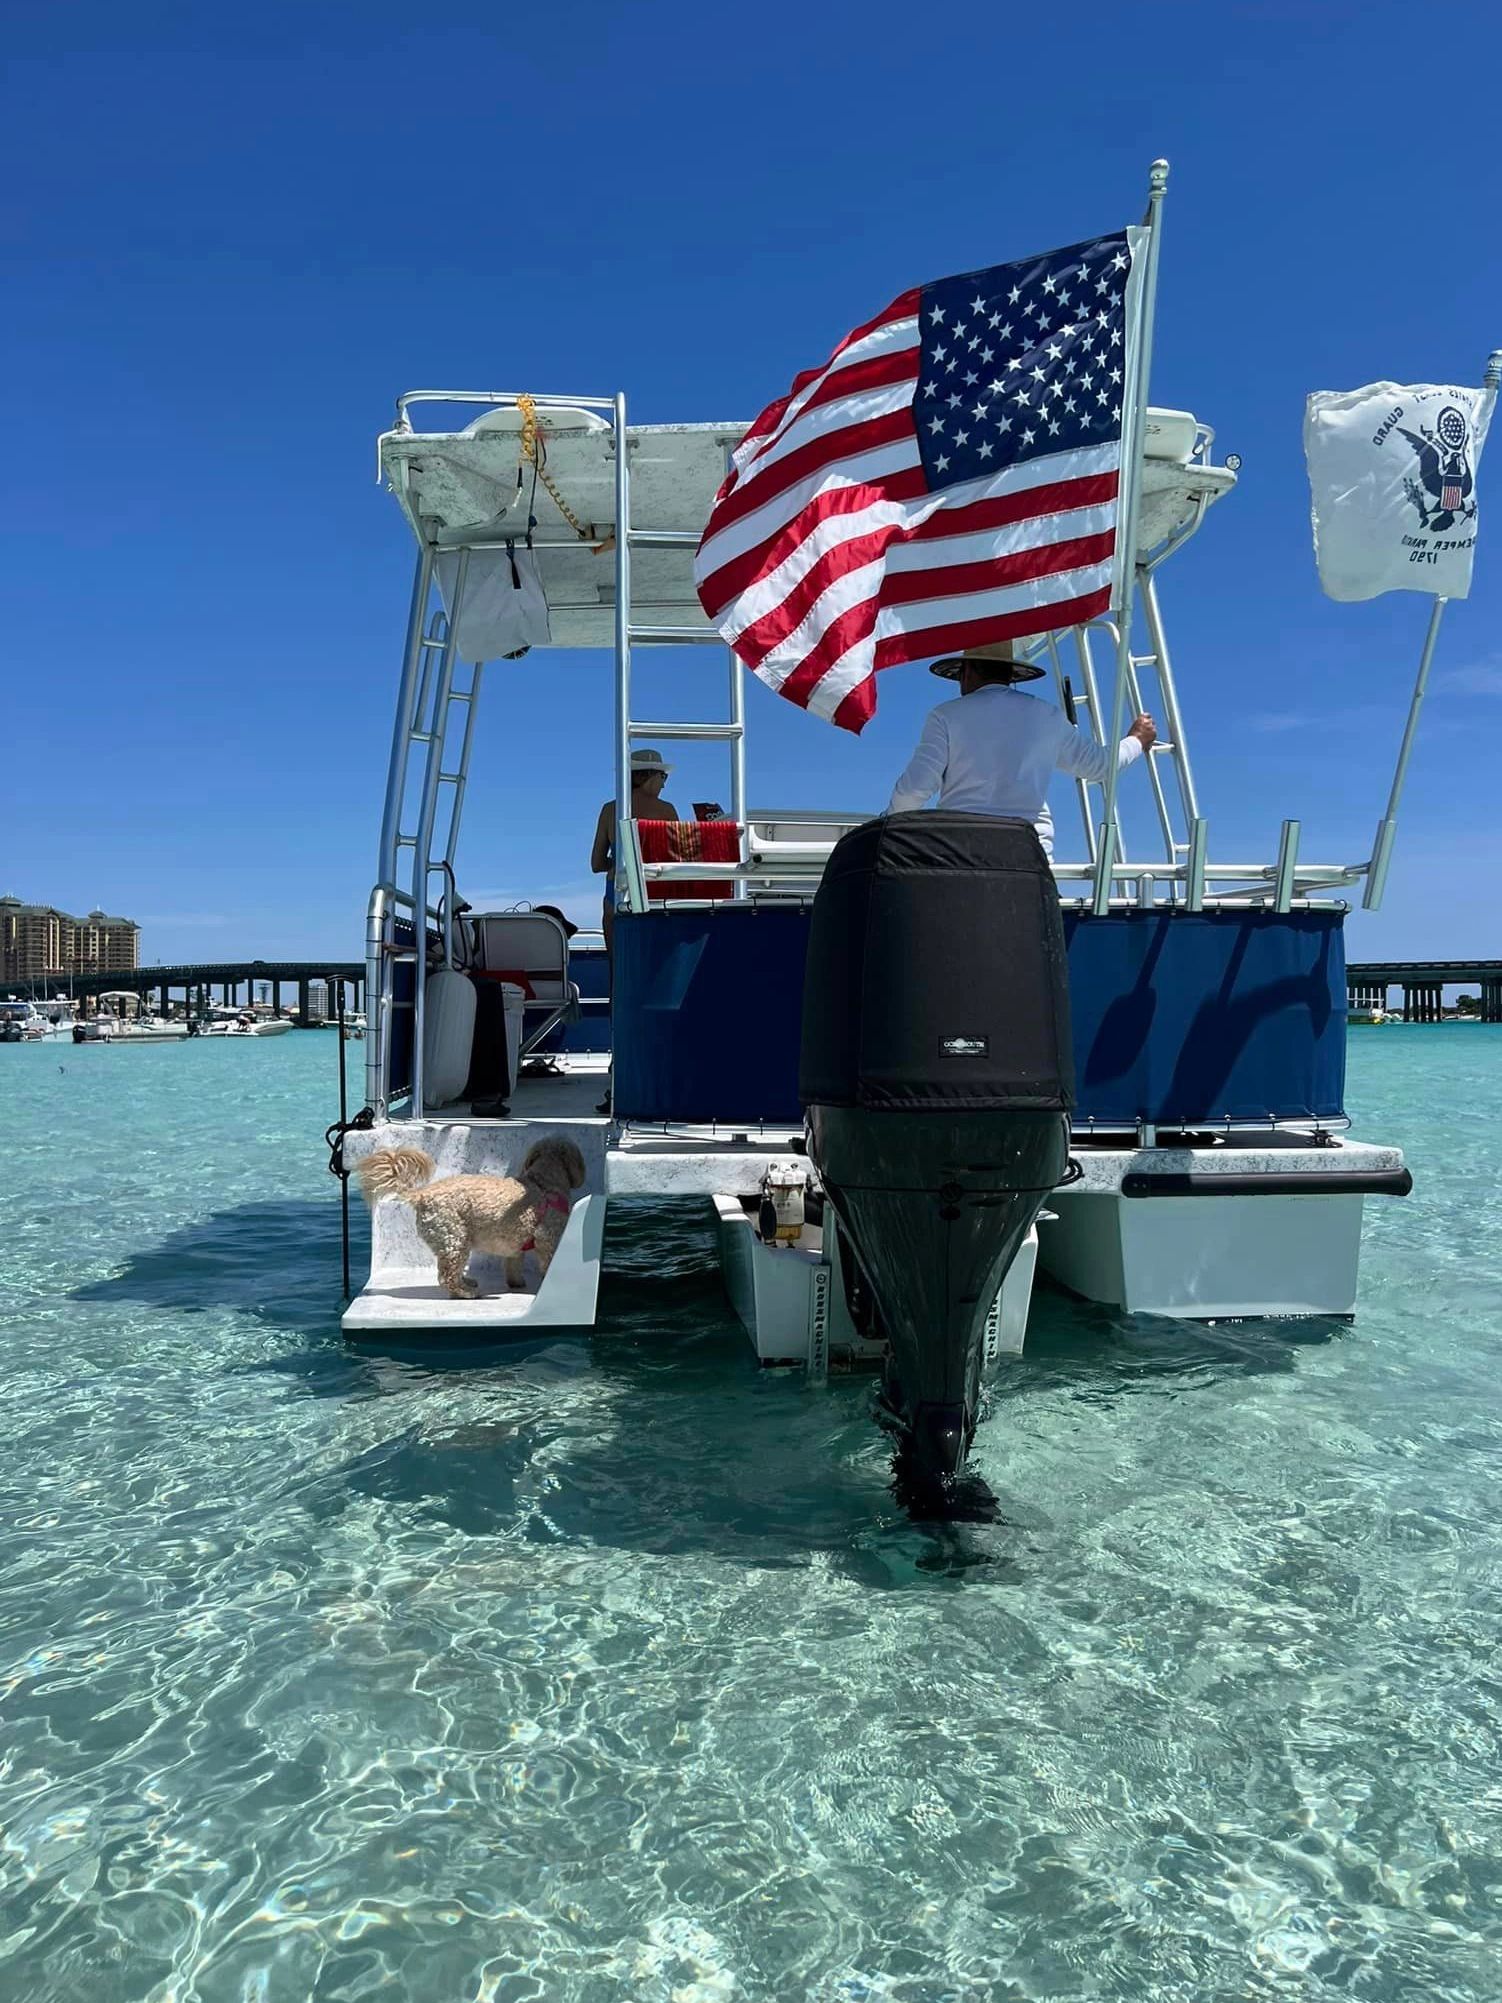 Explore Crab Island on our Private Pontoon Boats